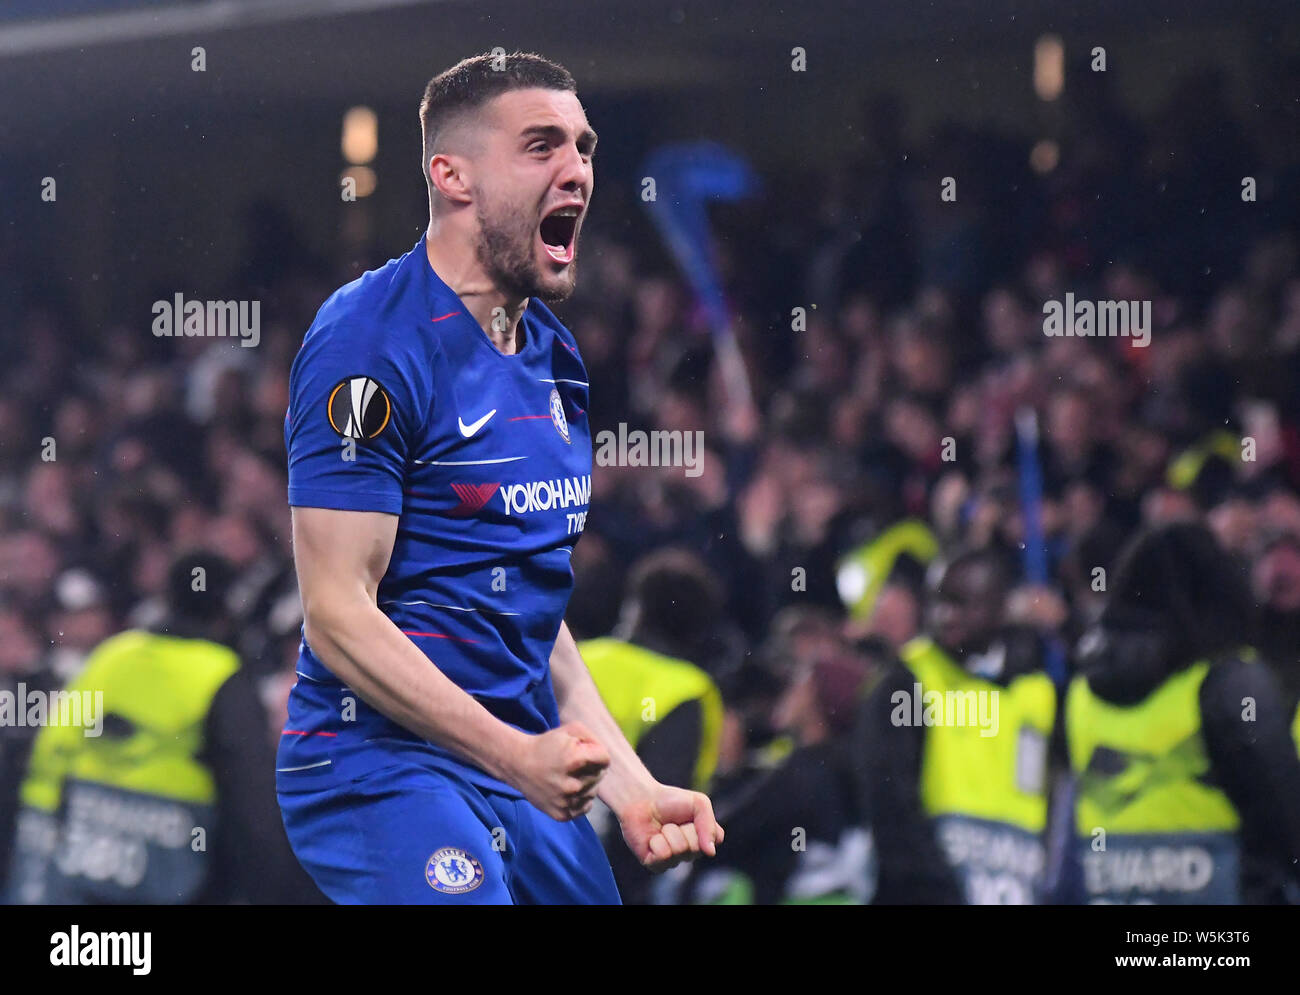 LONDON, ENGLAND - MAY 9, 2019: Mateo Kovacic of Chelsea celebrates the second leg of the 2018/19 UEFA Europa League Semi-Finals game between Chelsea FC (England) and Eintracht Frankfurt e.V. (Germany) at Stamford Bridge. Stock Photo